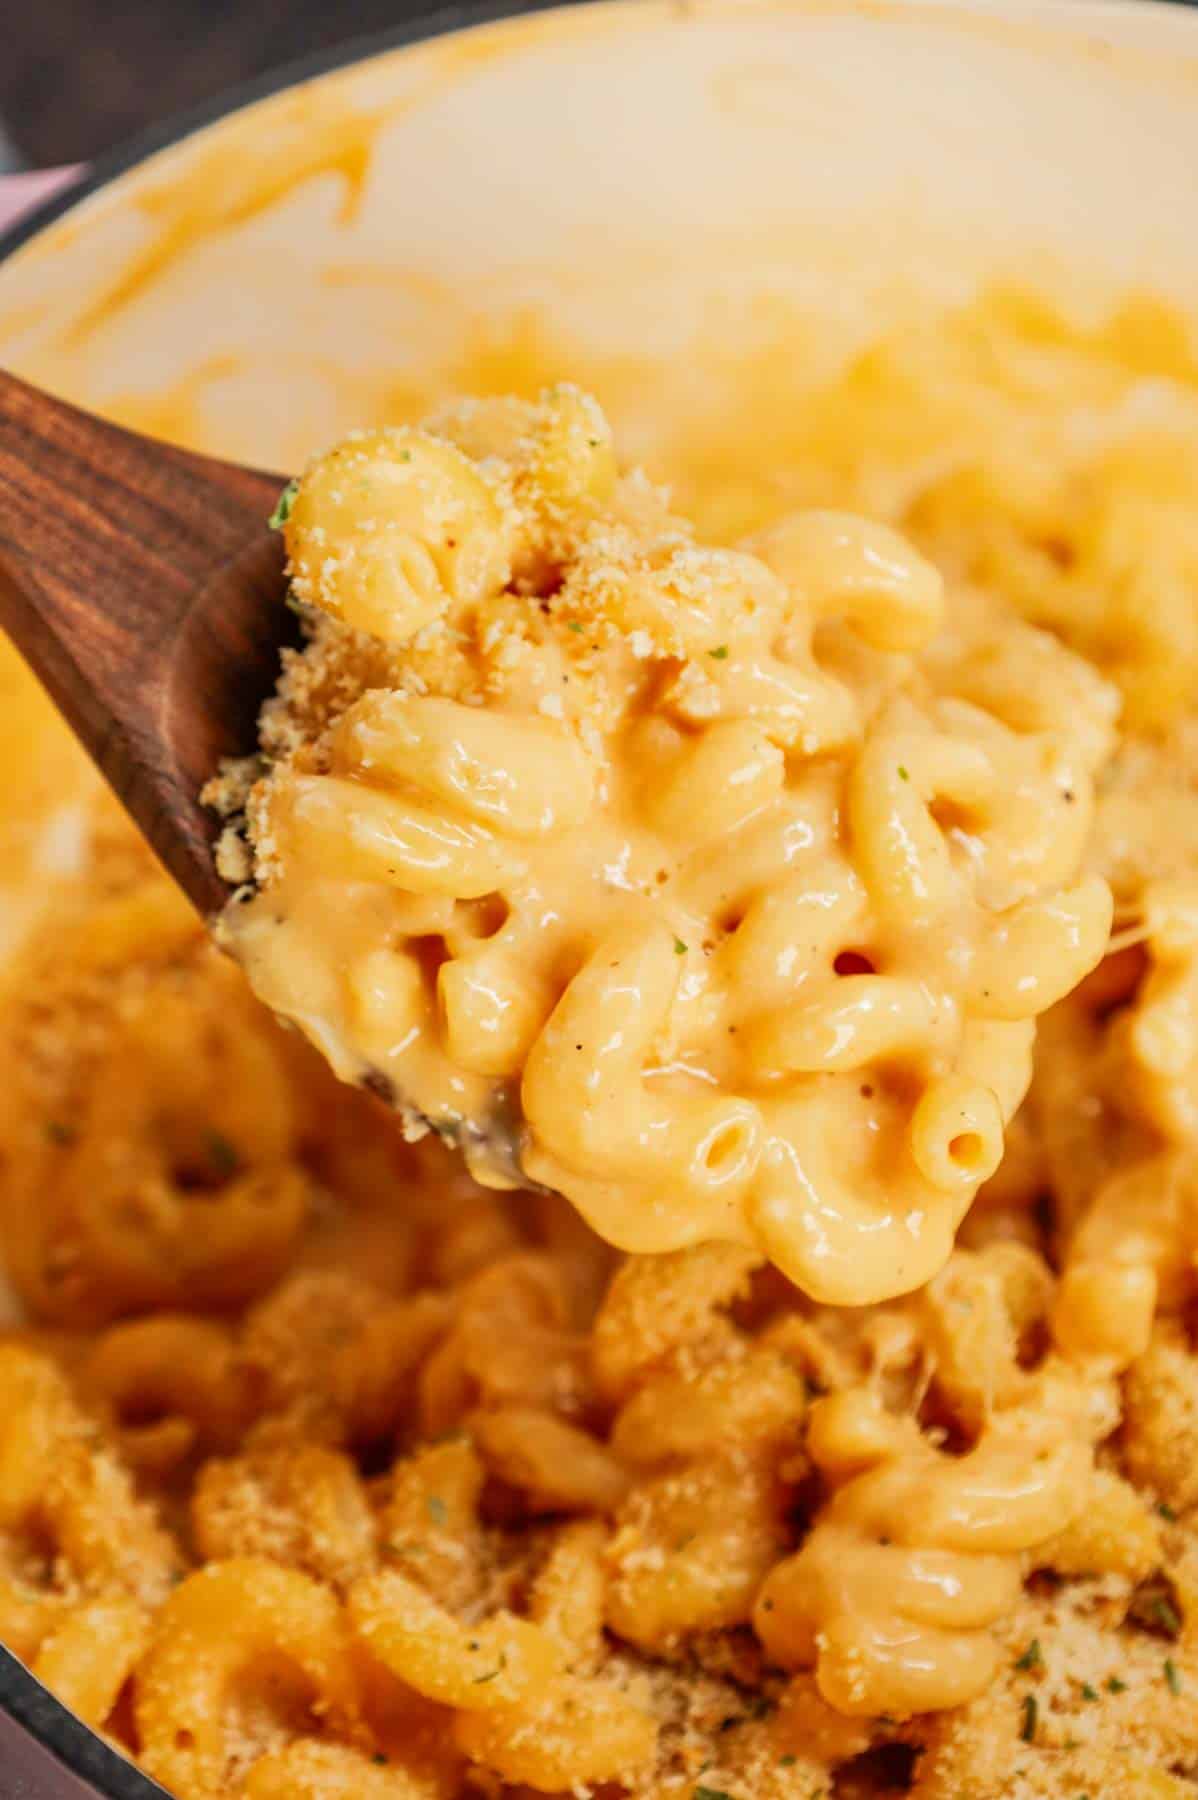 One Pot Mac and Cheese is a creamy and delicious pasta dish made with milk, cavatappi noodles, condensed cheddar soup, shredded cheddar cheese, mozzarella cheese, parmesan cheese and crushed Ritz crackers.